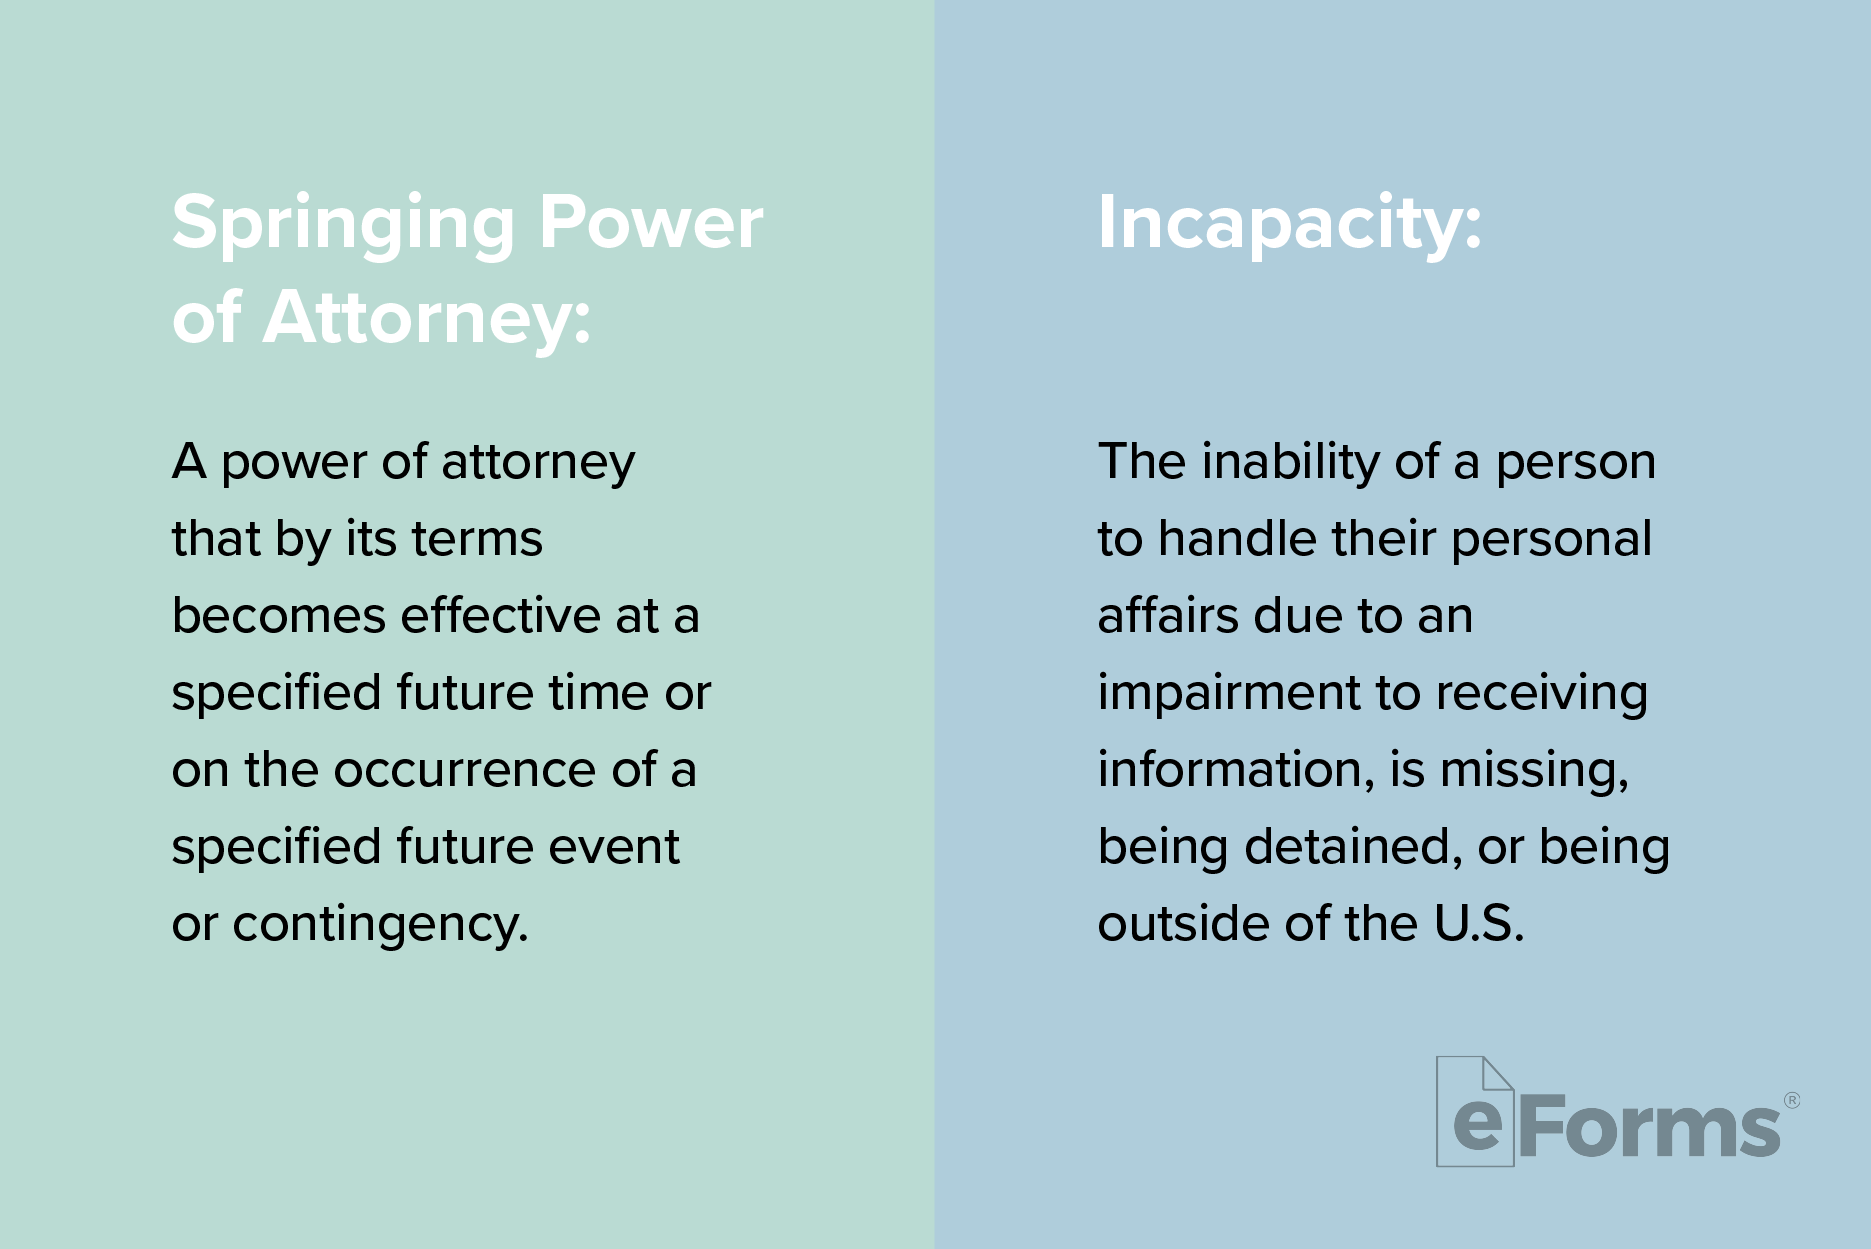 Definitions os Springing Power of Attorney and Incapacity.